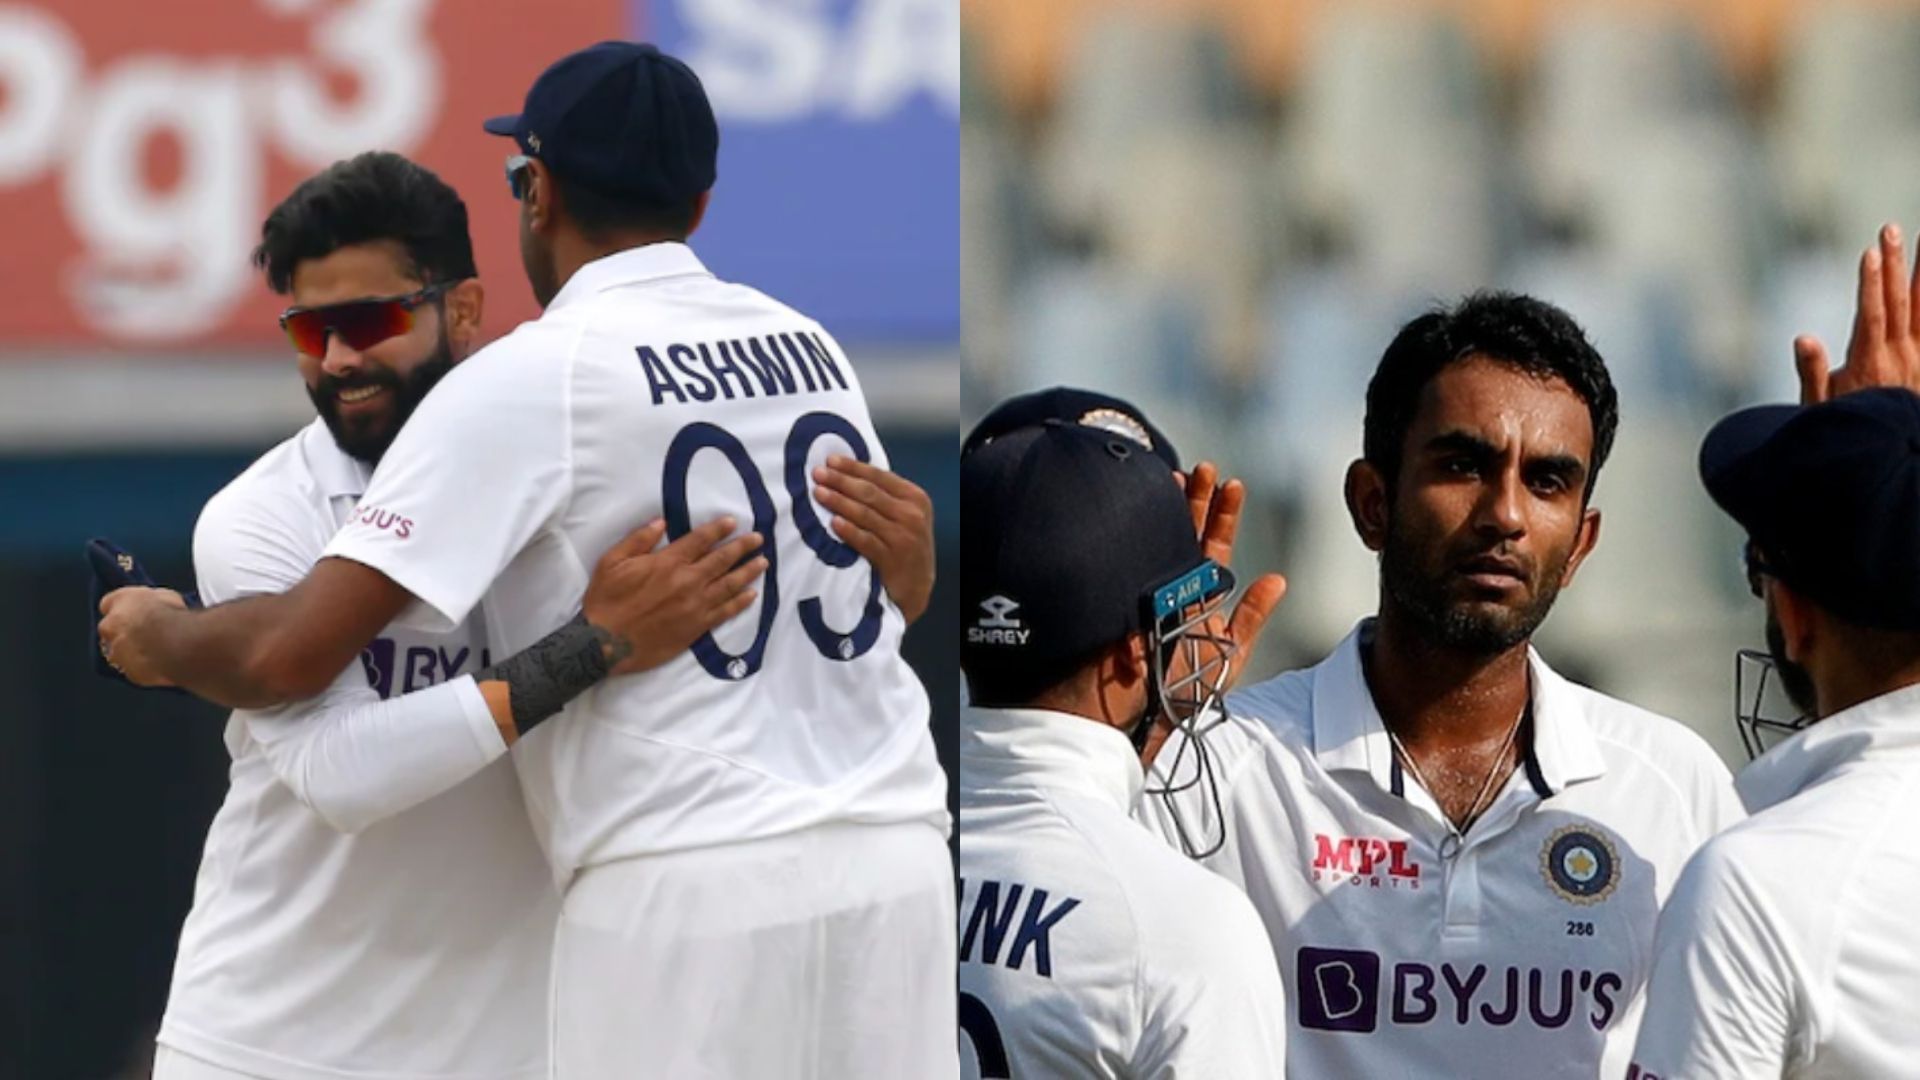 Ravichandran Ashwin has heaped praise on Ravindra Jadeja for being magnanimous in the first Test match at Mohali